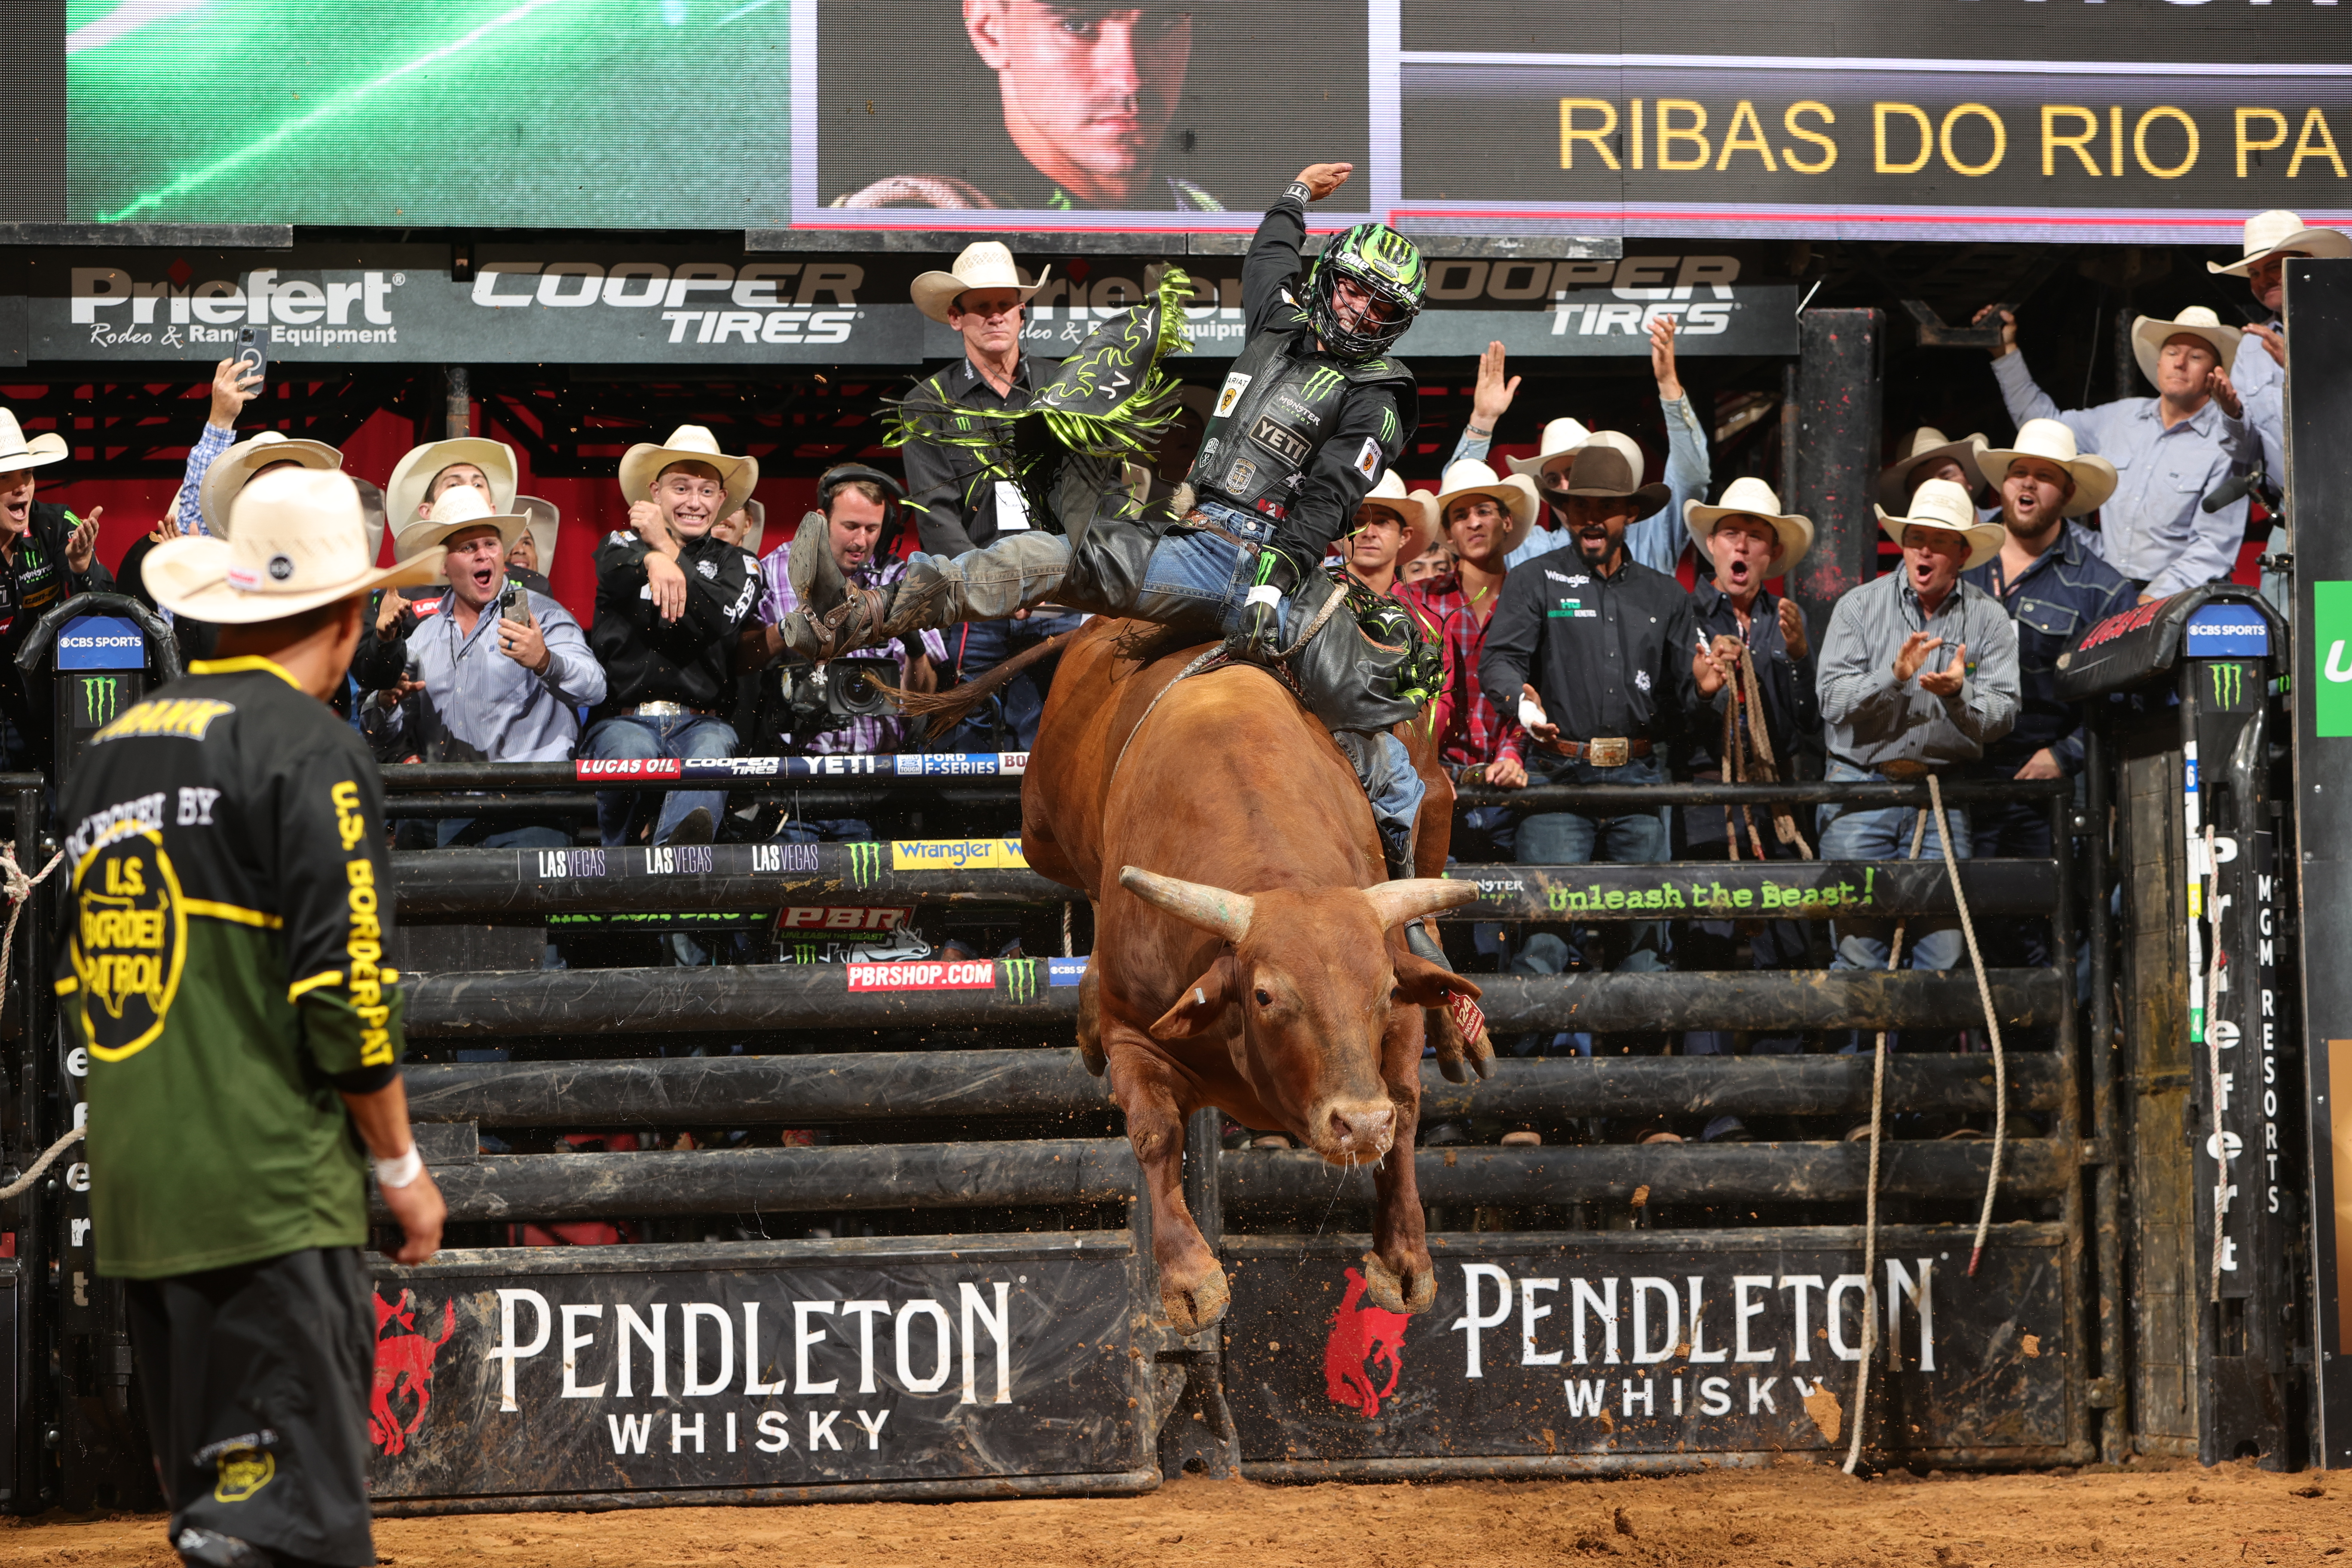 Professional Bull Riders Returns To CBS With The Music City Knockout 15/15 Bucking Battle This Weekend